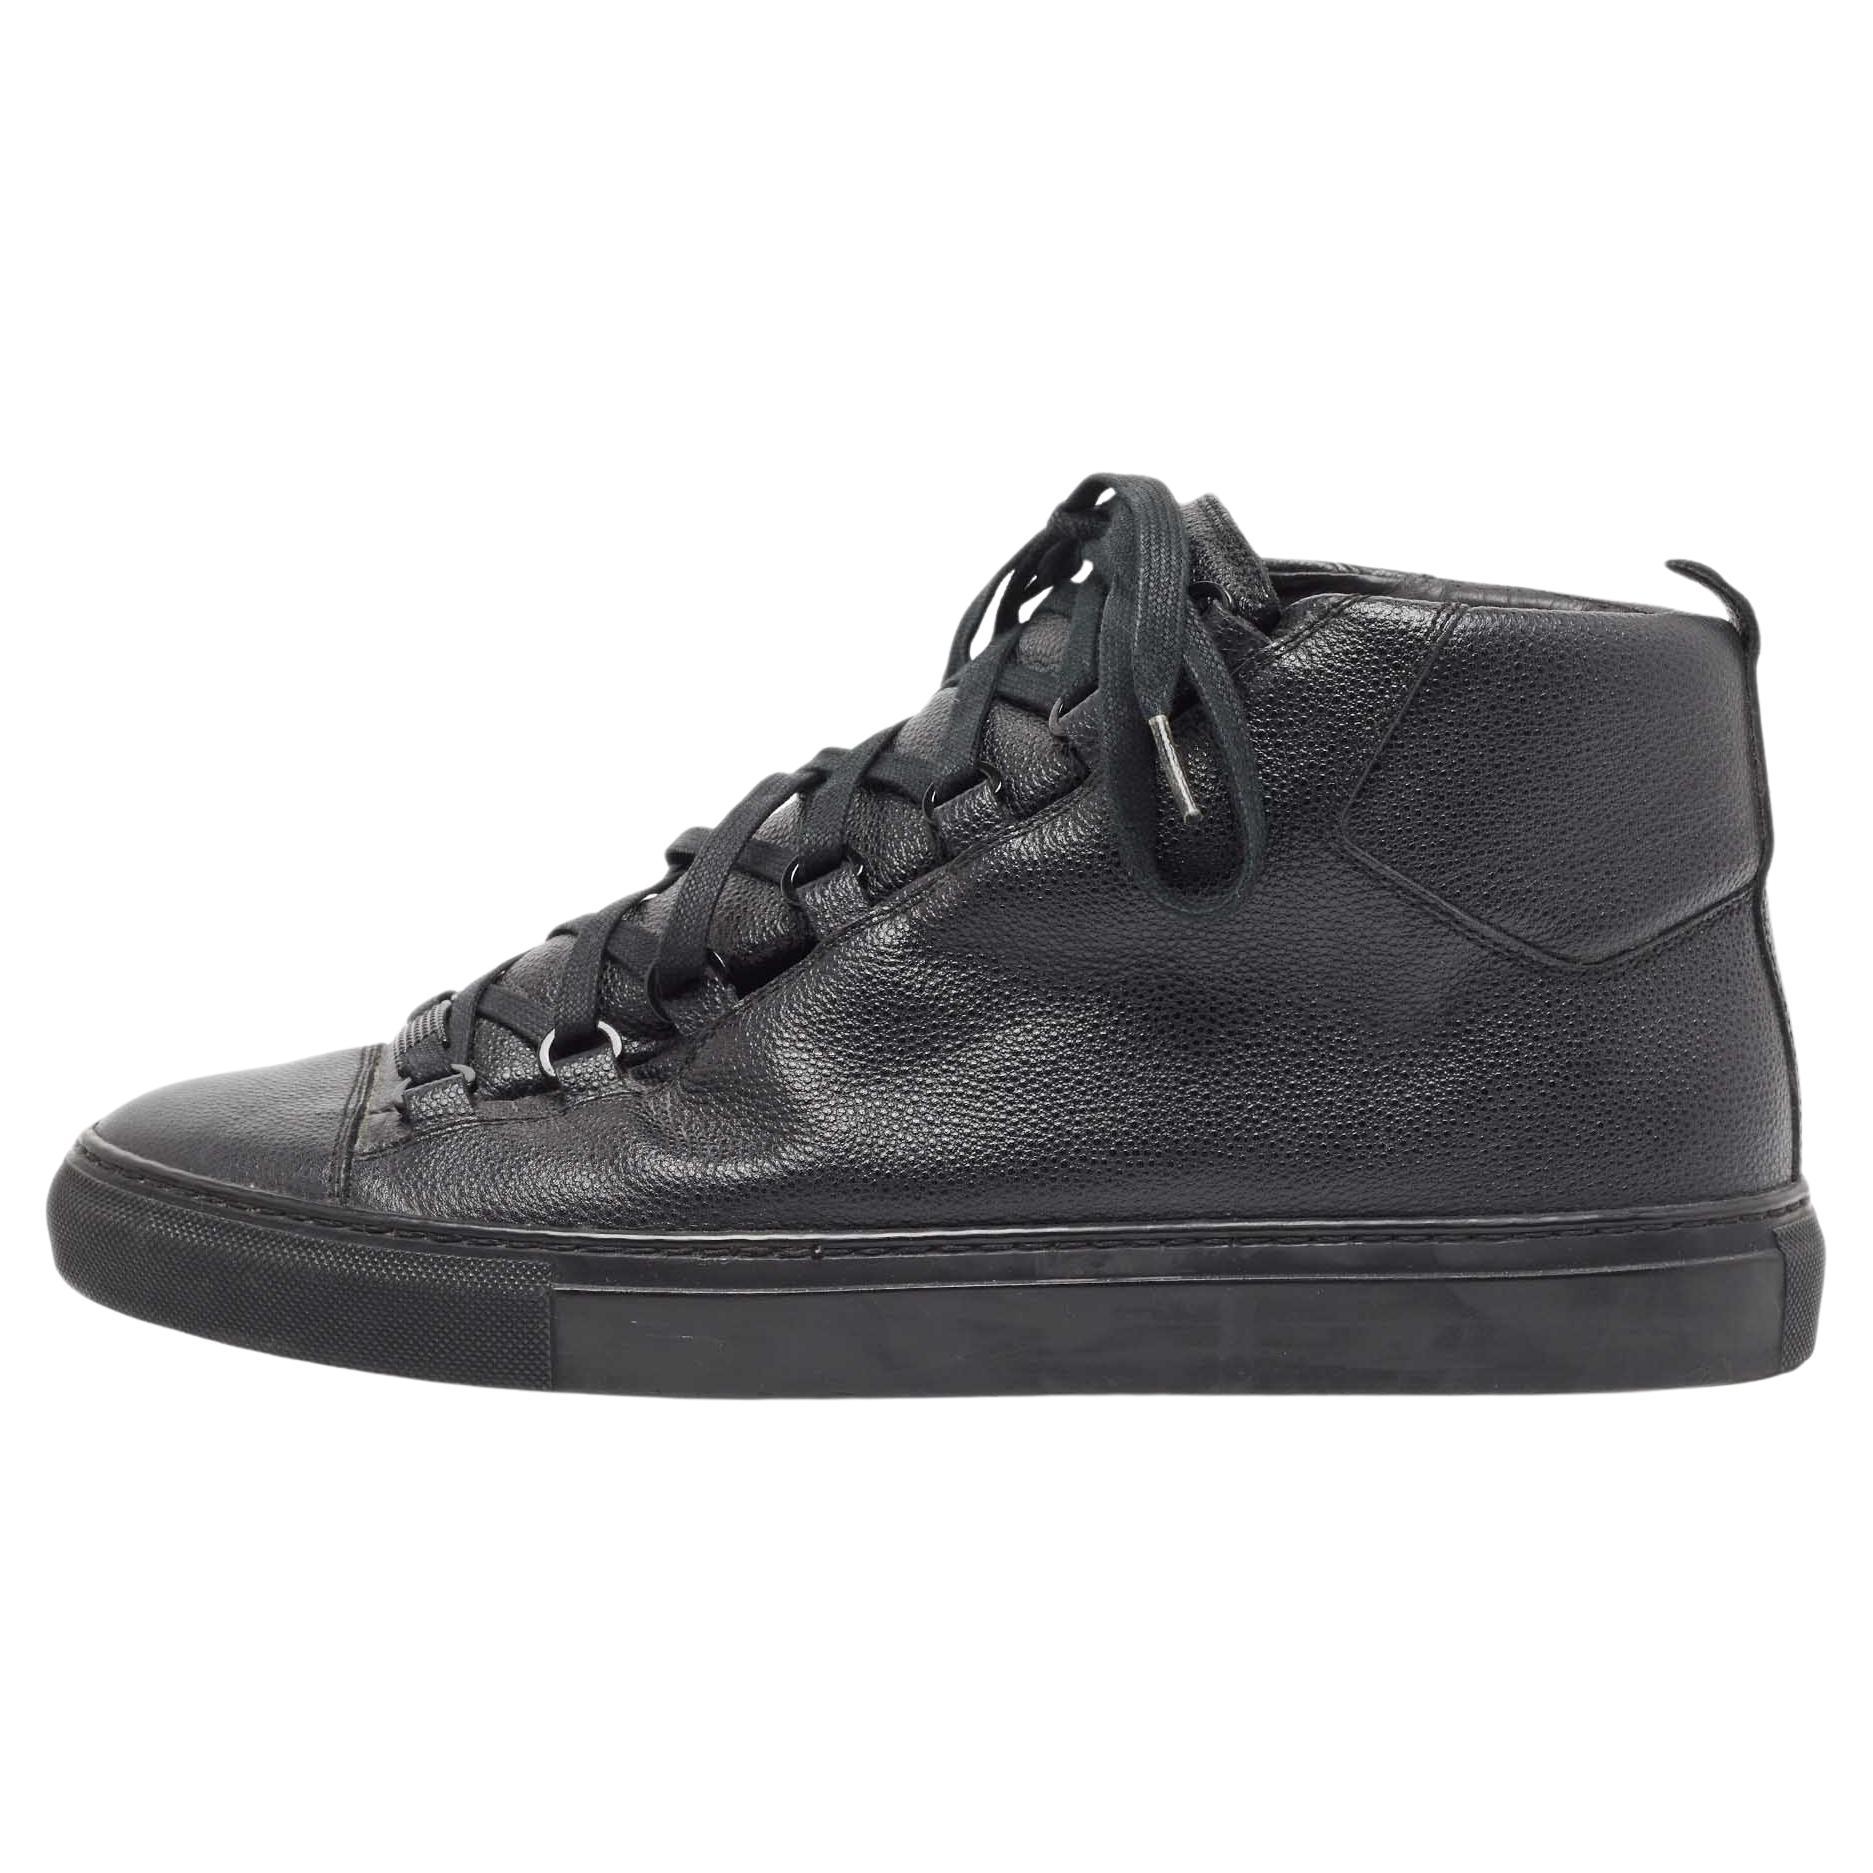 Balenciaga Black Leather Arena High Top Sneakers Size 43 For Sale